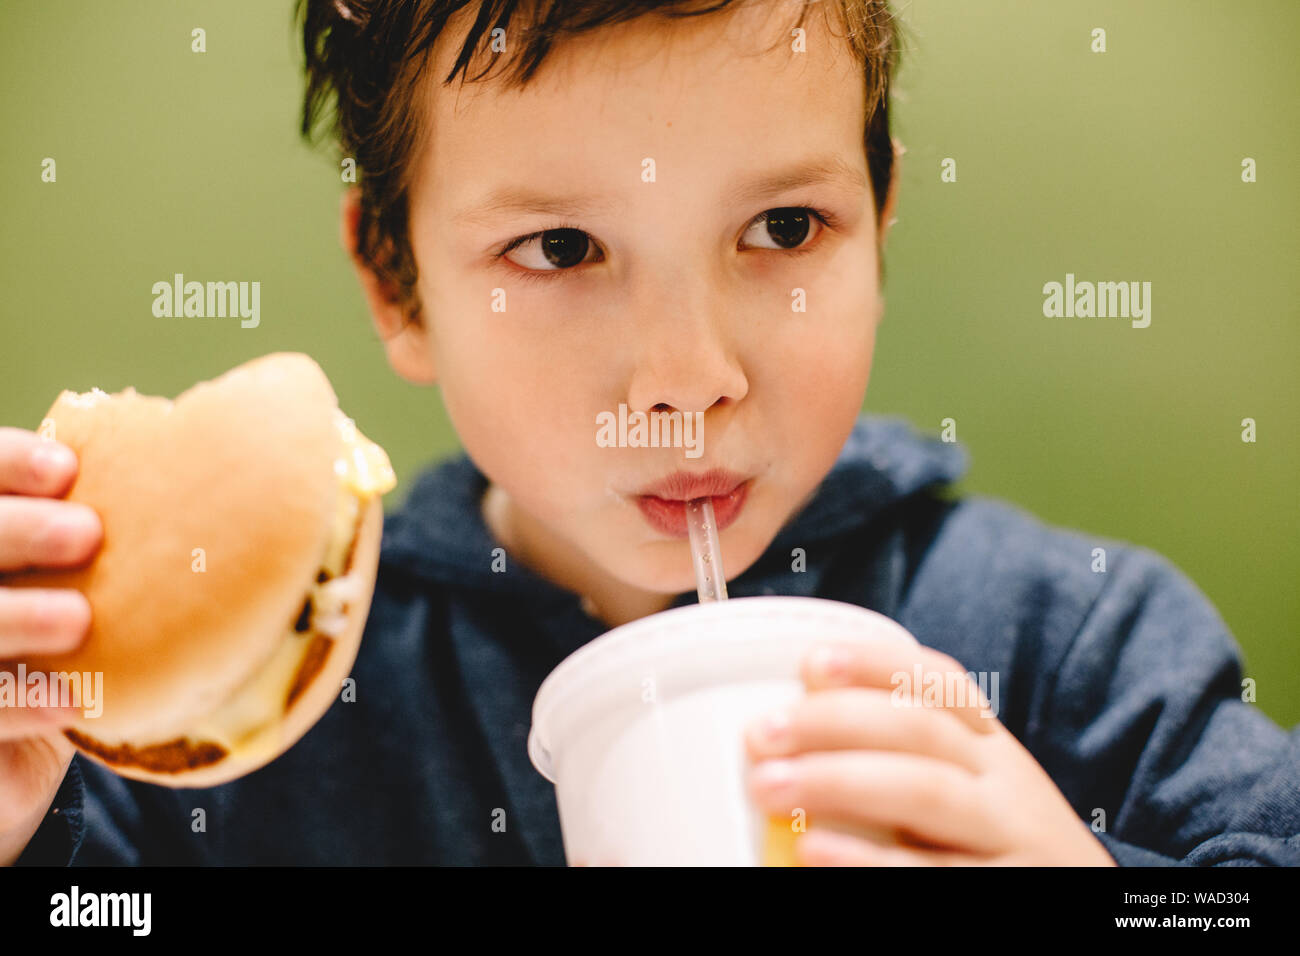 Boy eating and drinking against green background Stock Photo